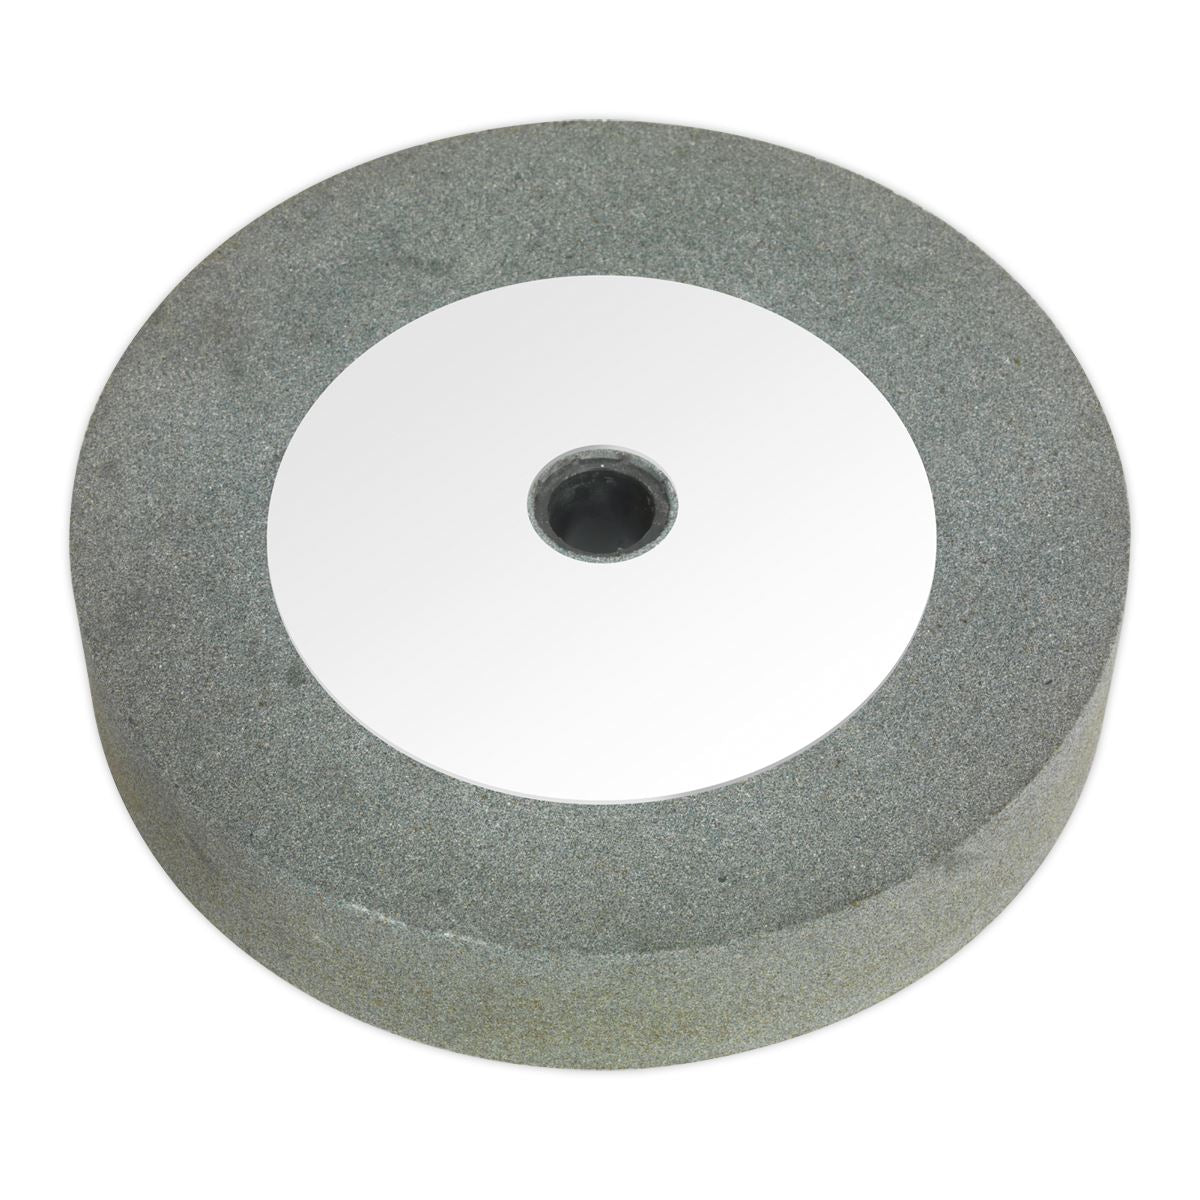 Sealey Wet Stone Wheel Ø200 x 40mm 20mm Bore for SM521